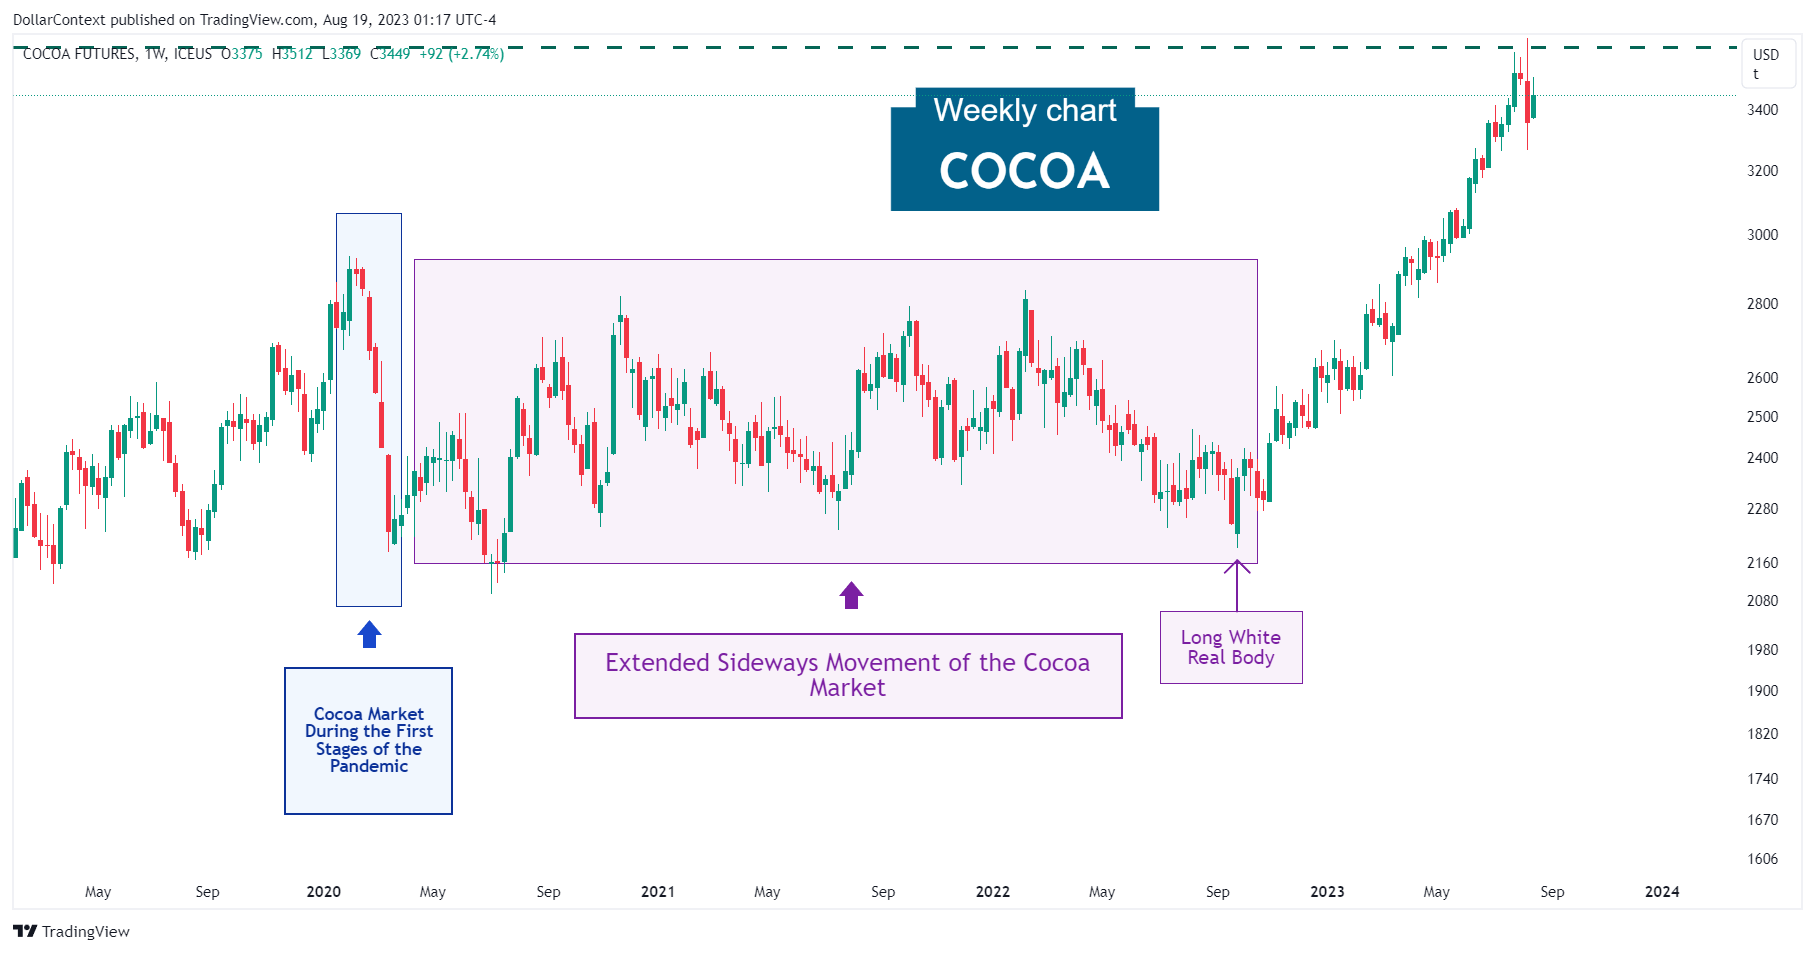 Cocoa: Lateral Range in 2020, 2021, and 2022 (Weekly Chart)